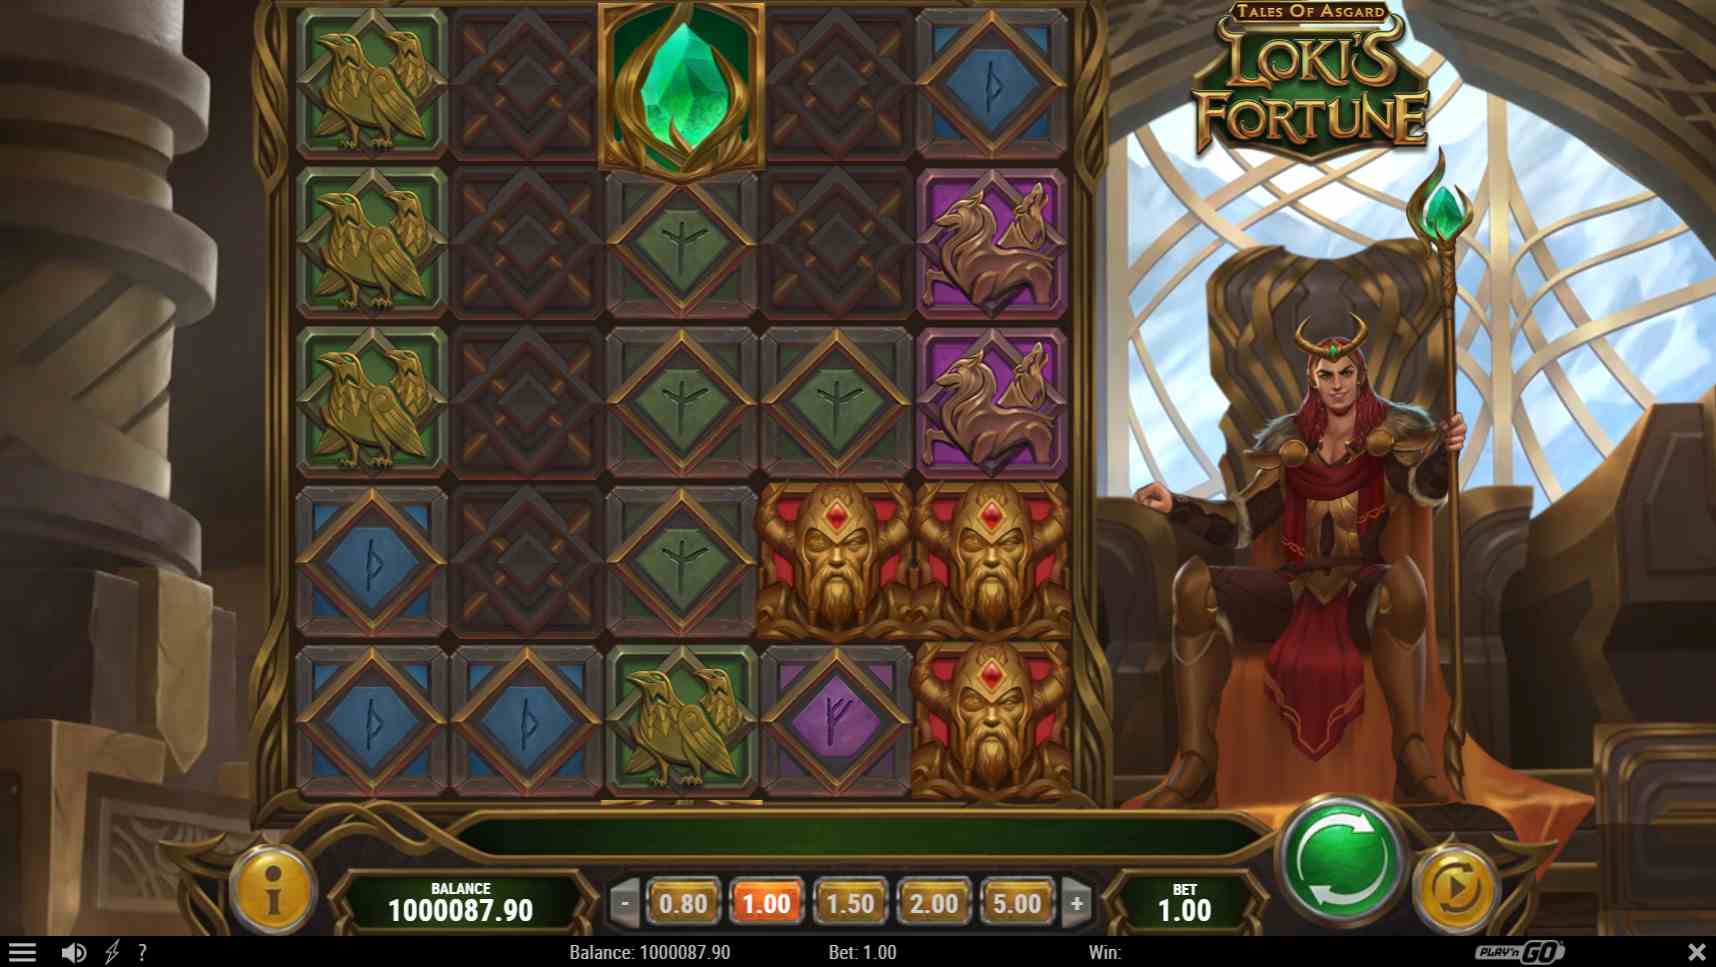 Tales of Asgard Loki's Fortune Base Game